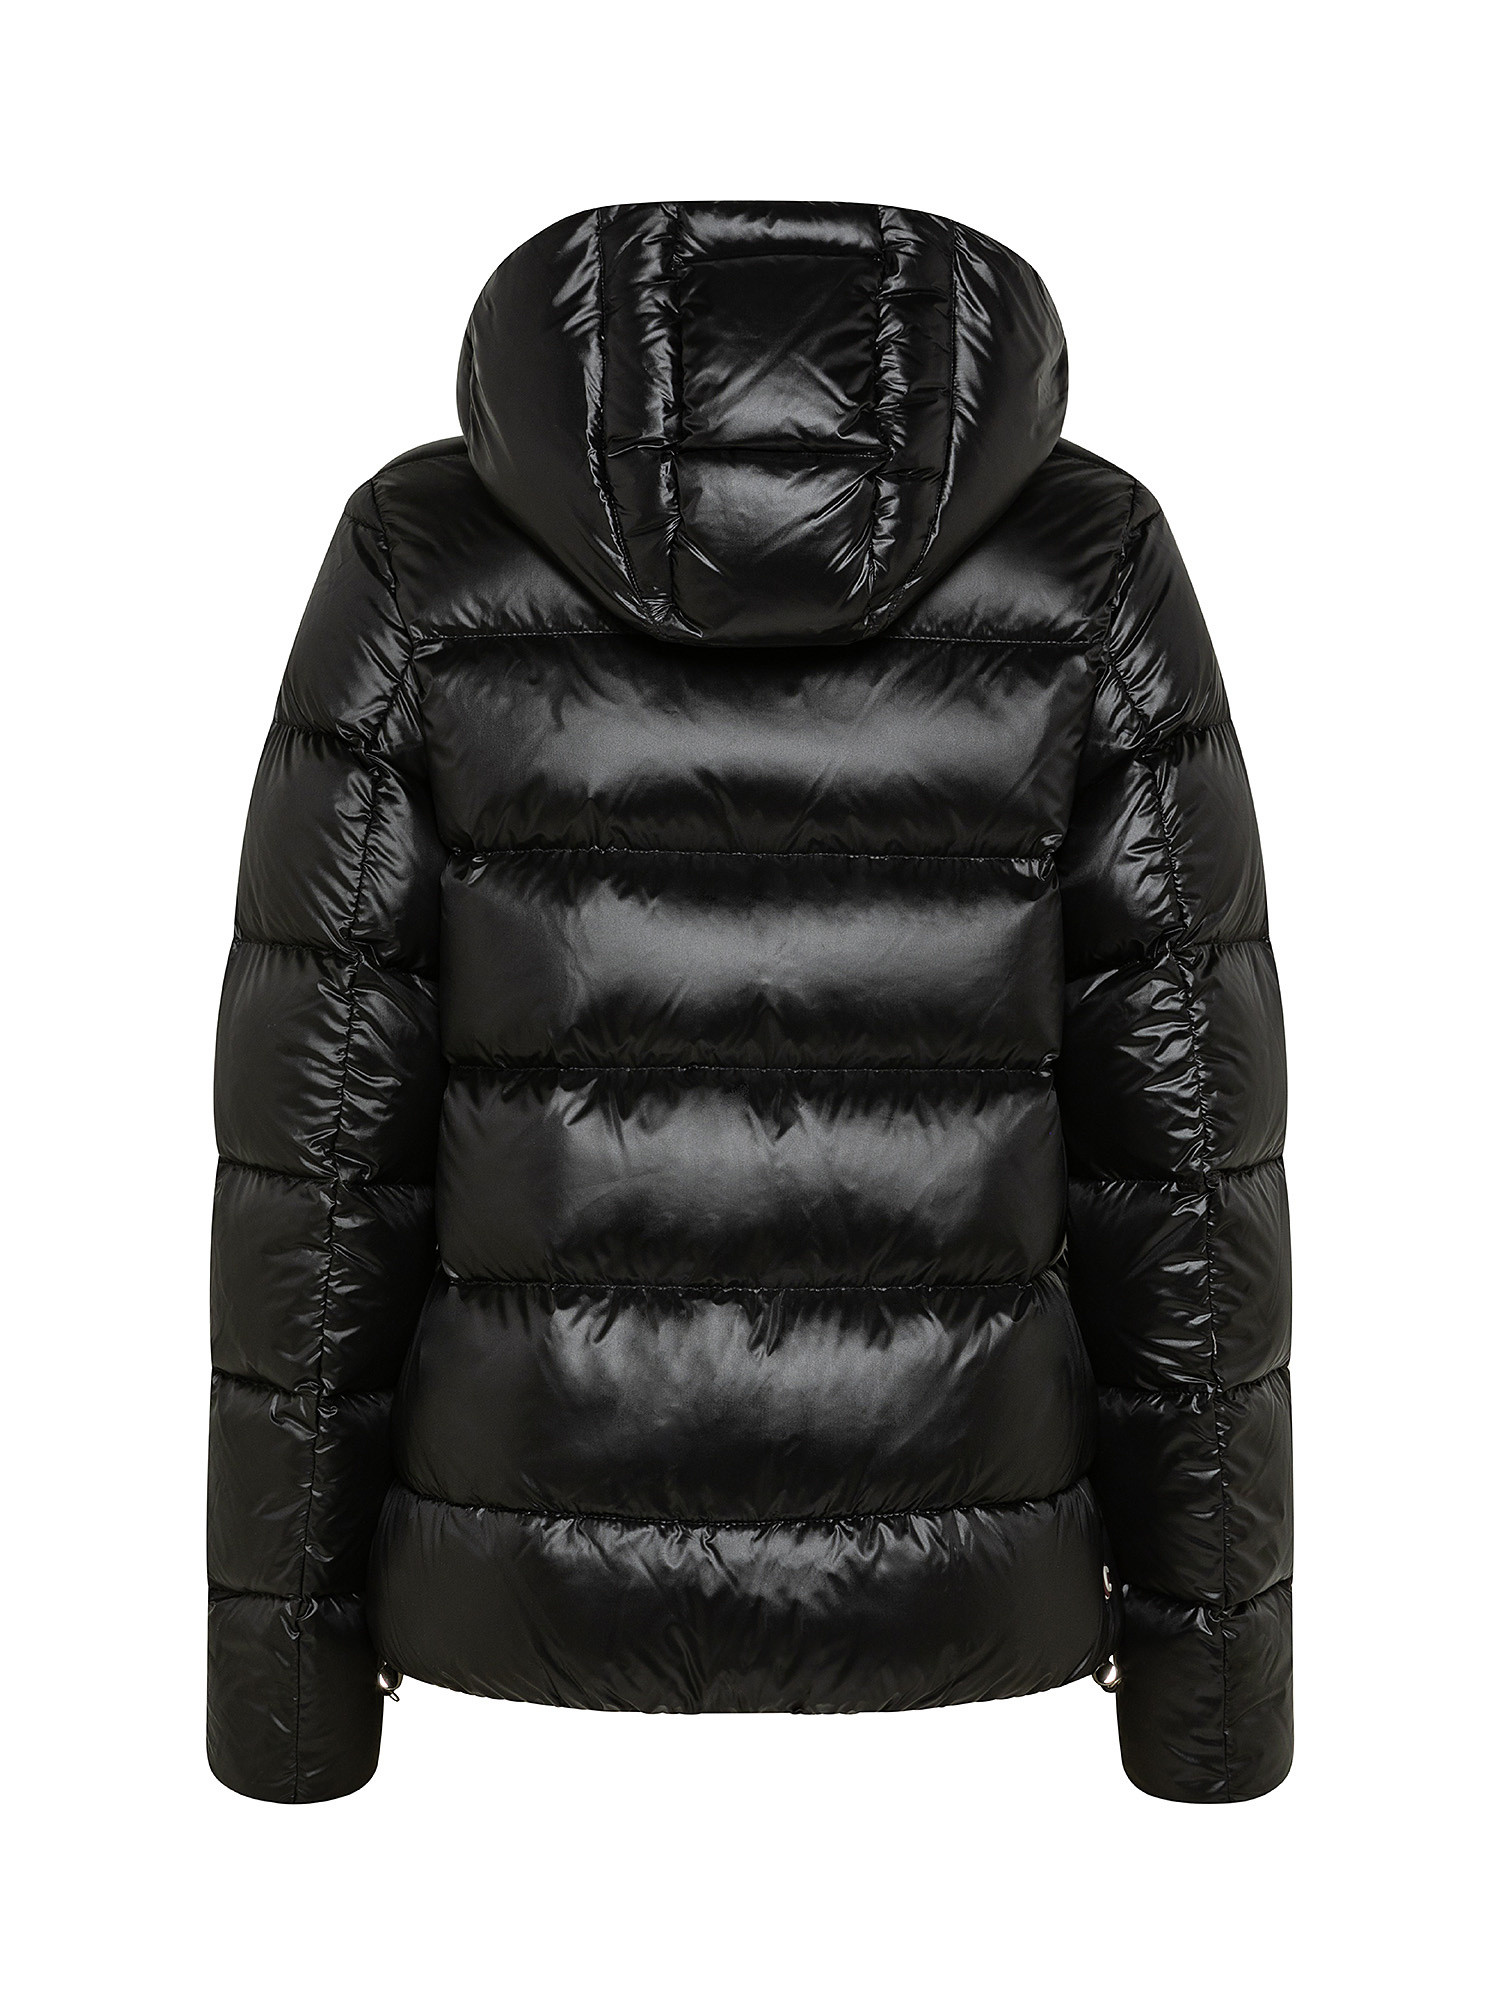 Quilted jacket with high collar and detachable hood, Black, large image number 1